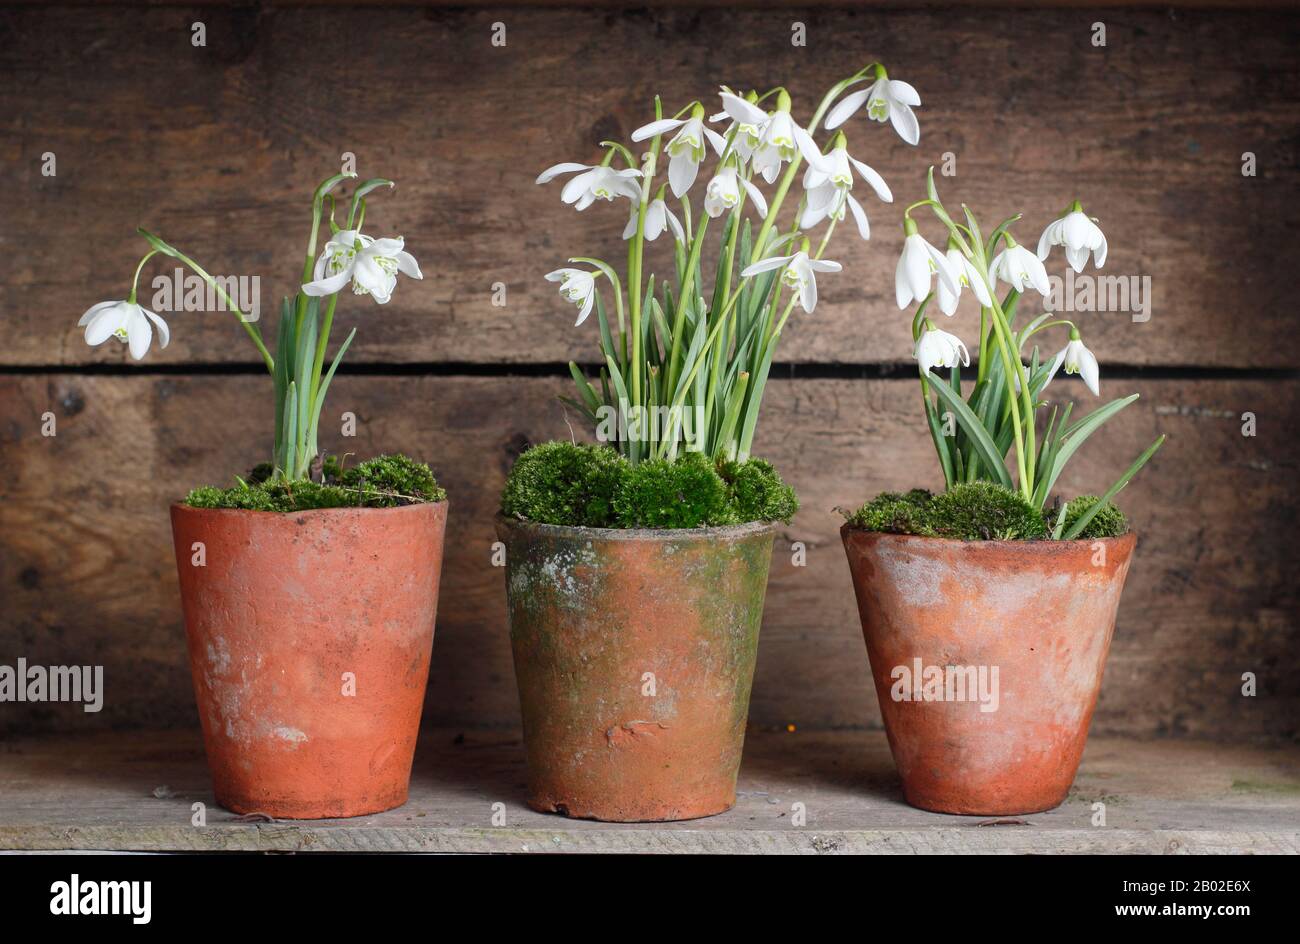 Galanthus nivalis. Snowdrops, in clay pots topped with moss, displayed in wooden crate in an English garden Stock Photo